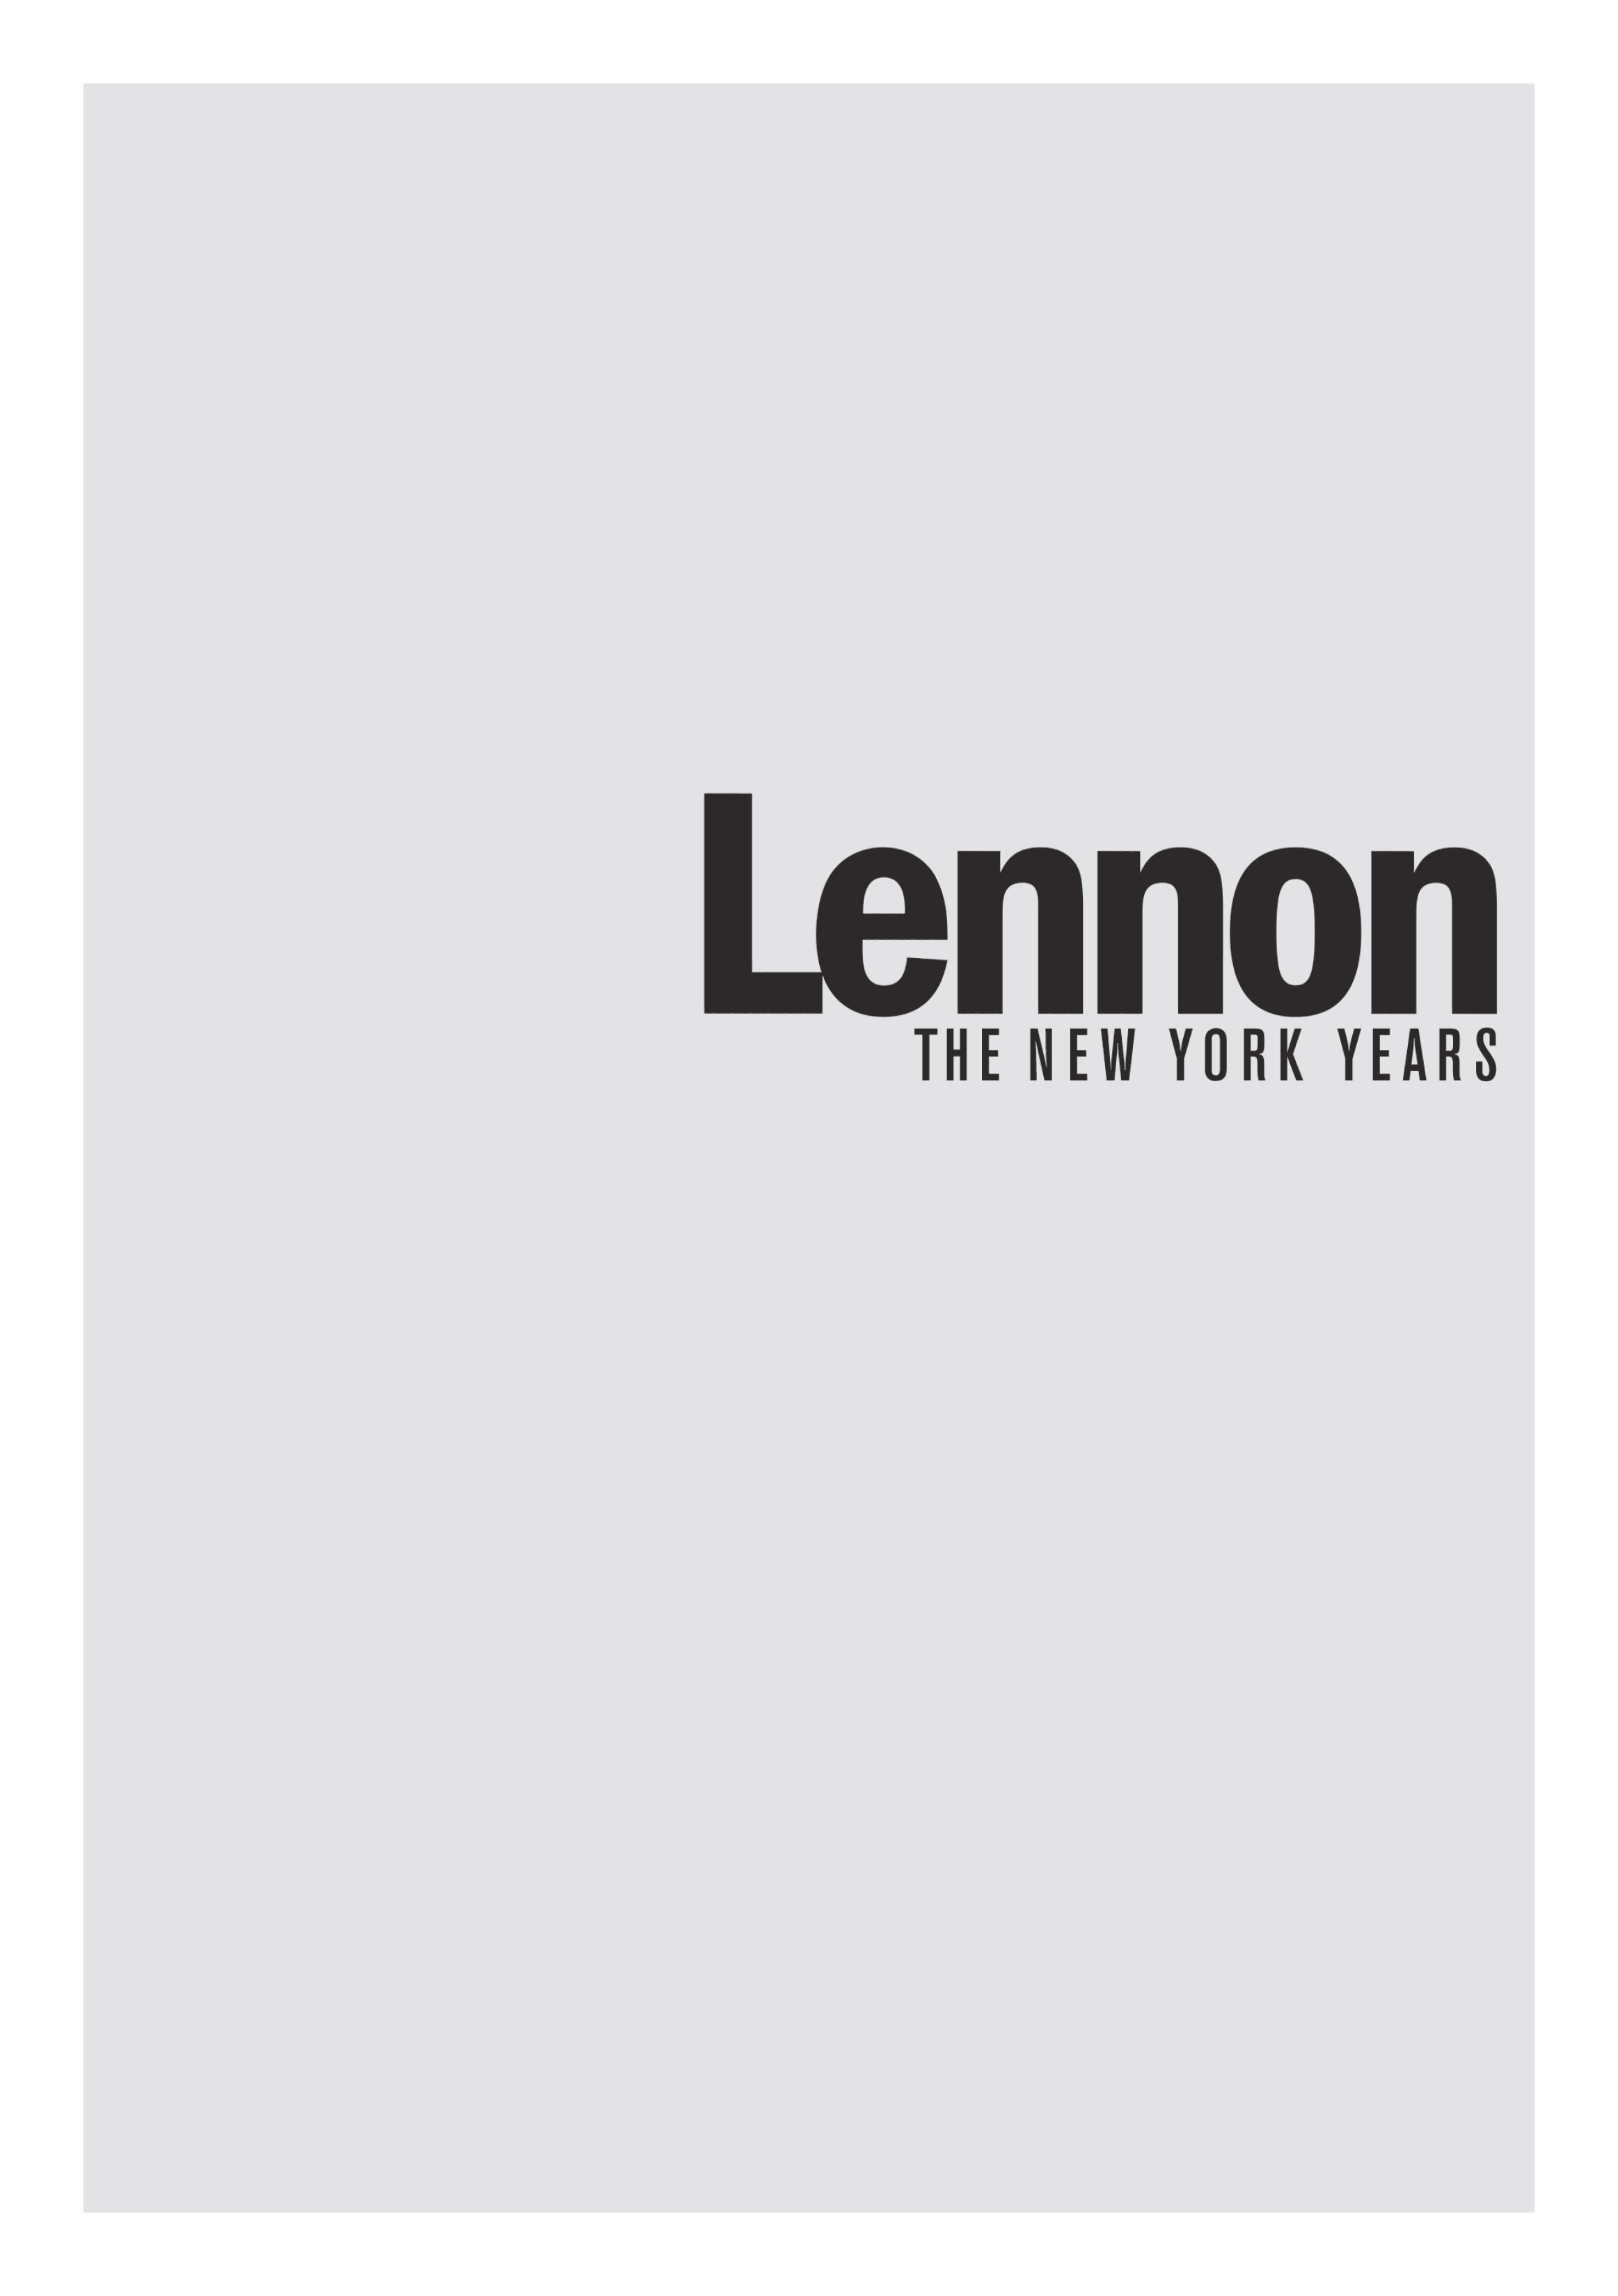 Read online Lennon: The New York Years comic -  Issue # TPB (Part 1) - 2